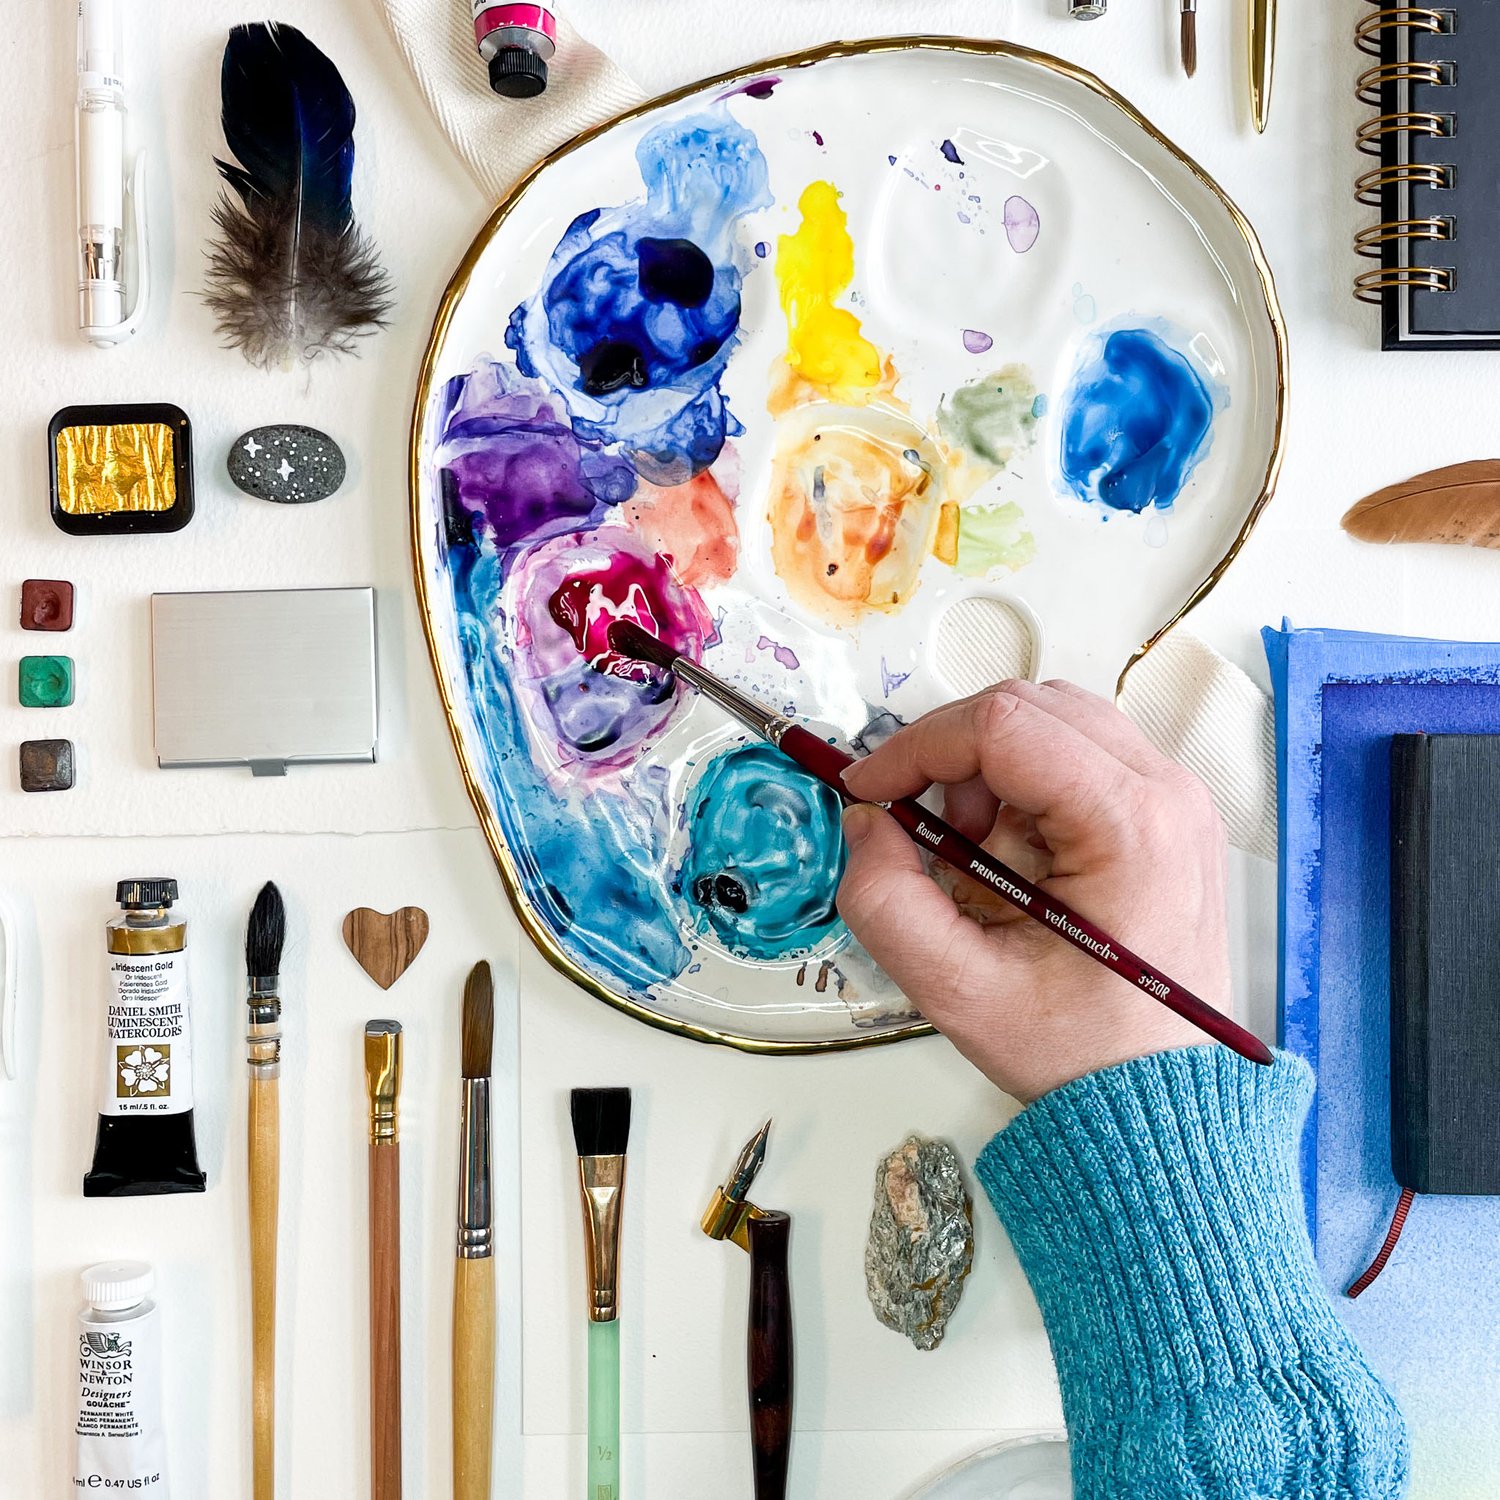 Are you a beginner with watercolor? - DANIEL SMITH Artists' Materials